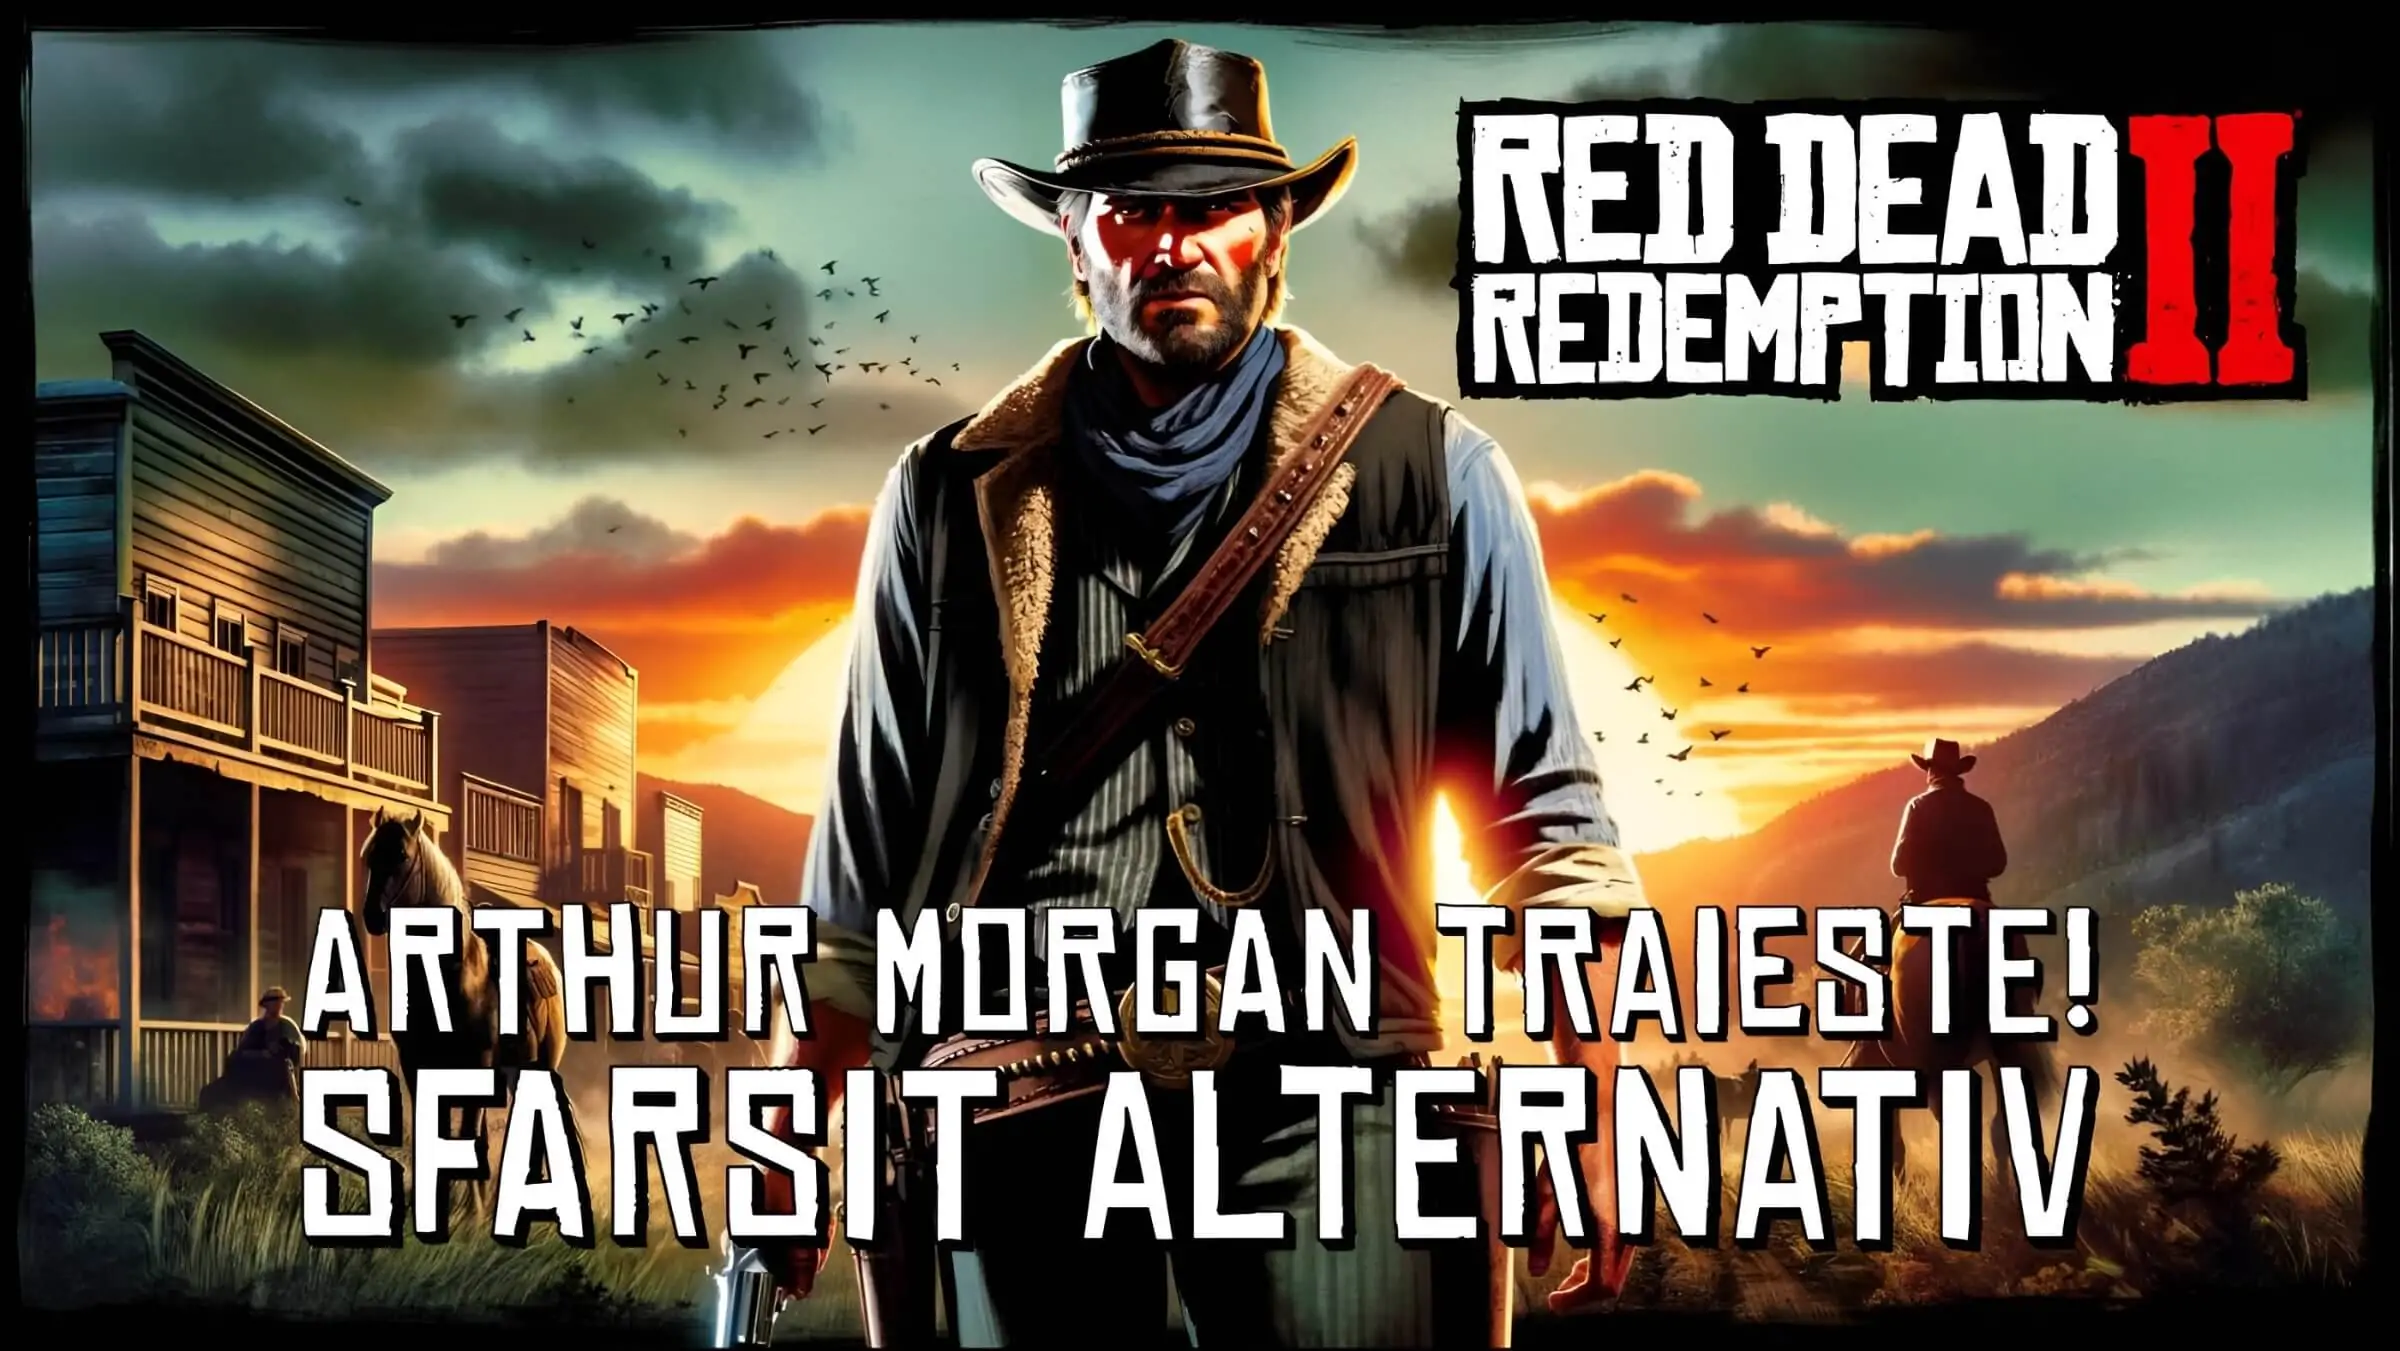 Red Dead Redemption player finds reference to Arthur Morgan in original game